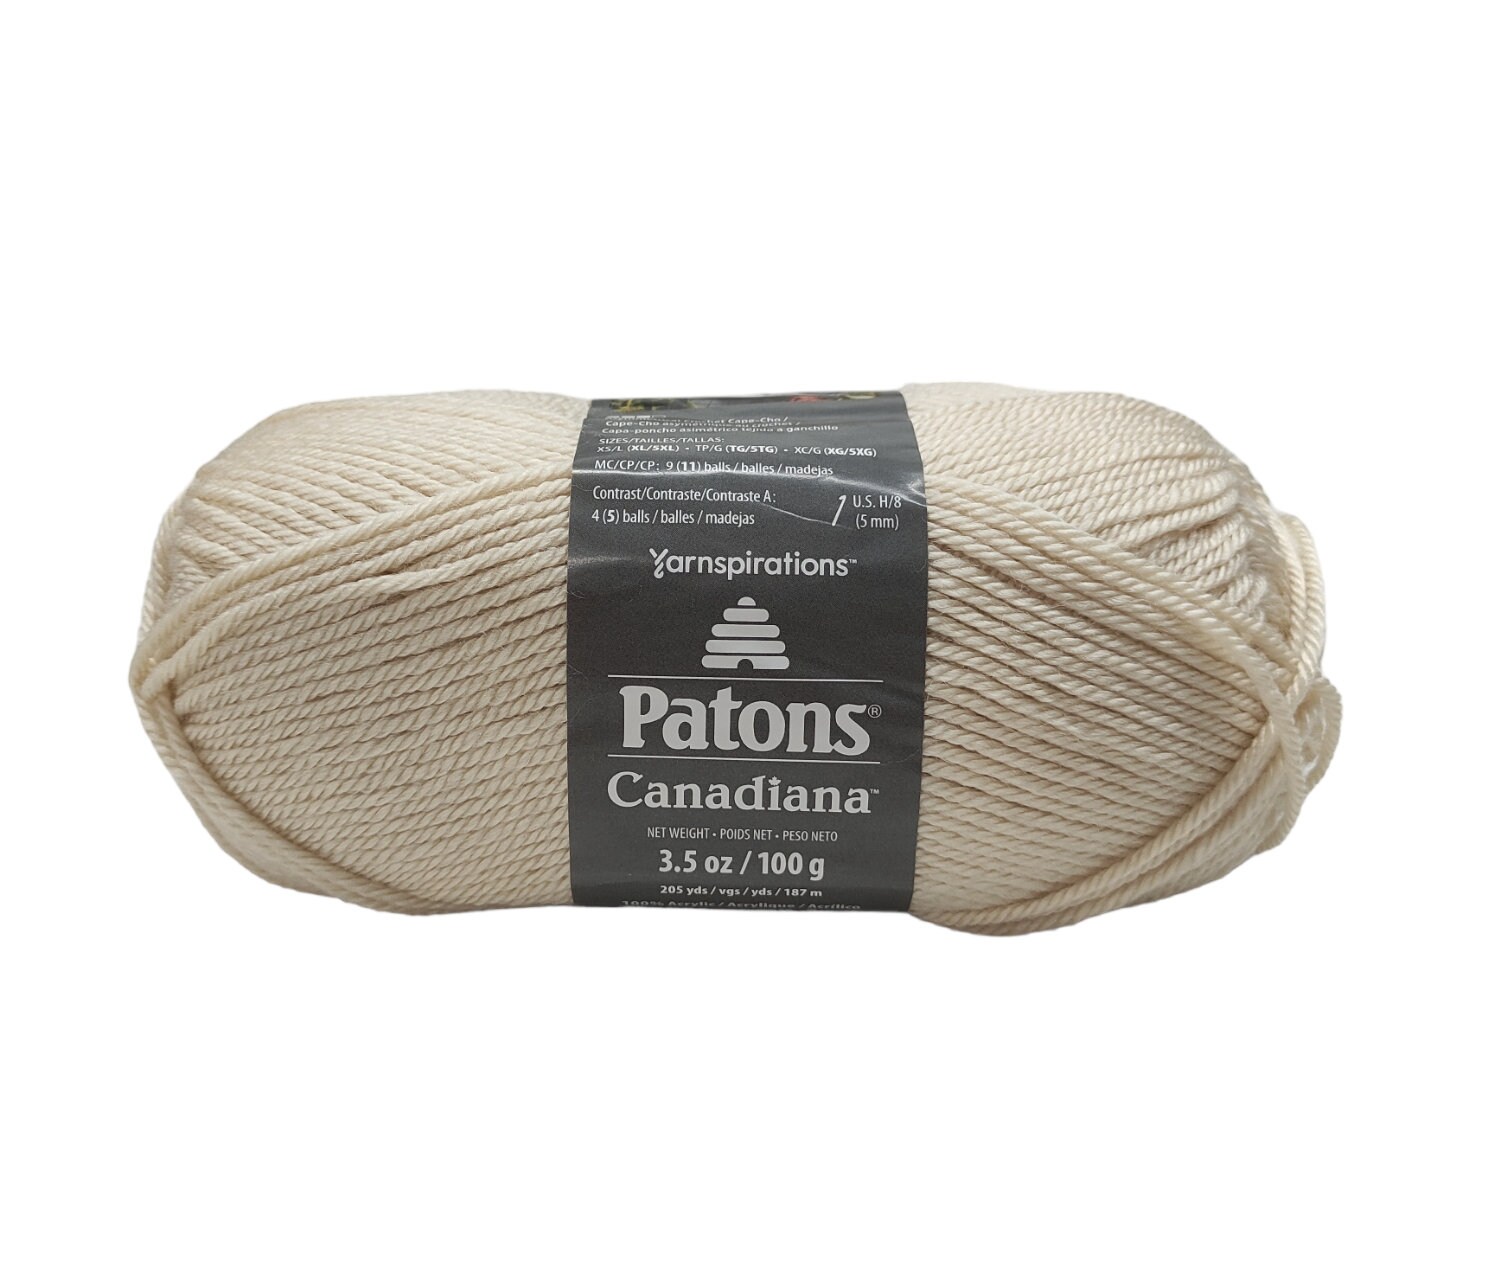 PANSY - Patons Classic Wool Worsted Yarn Medium Weight (4). 100